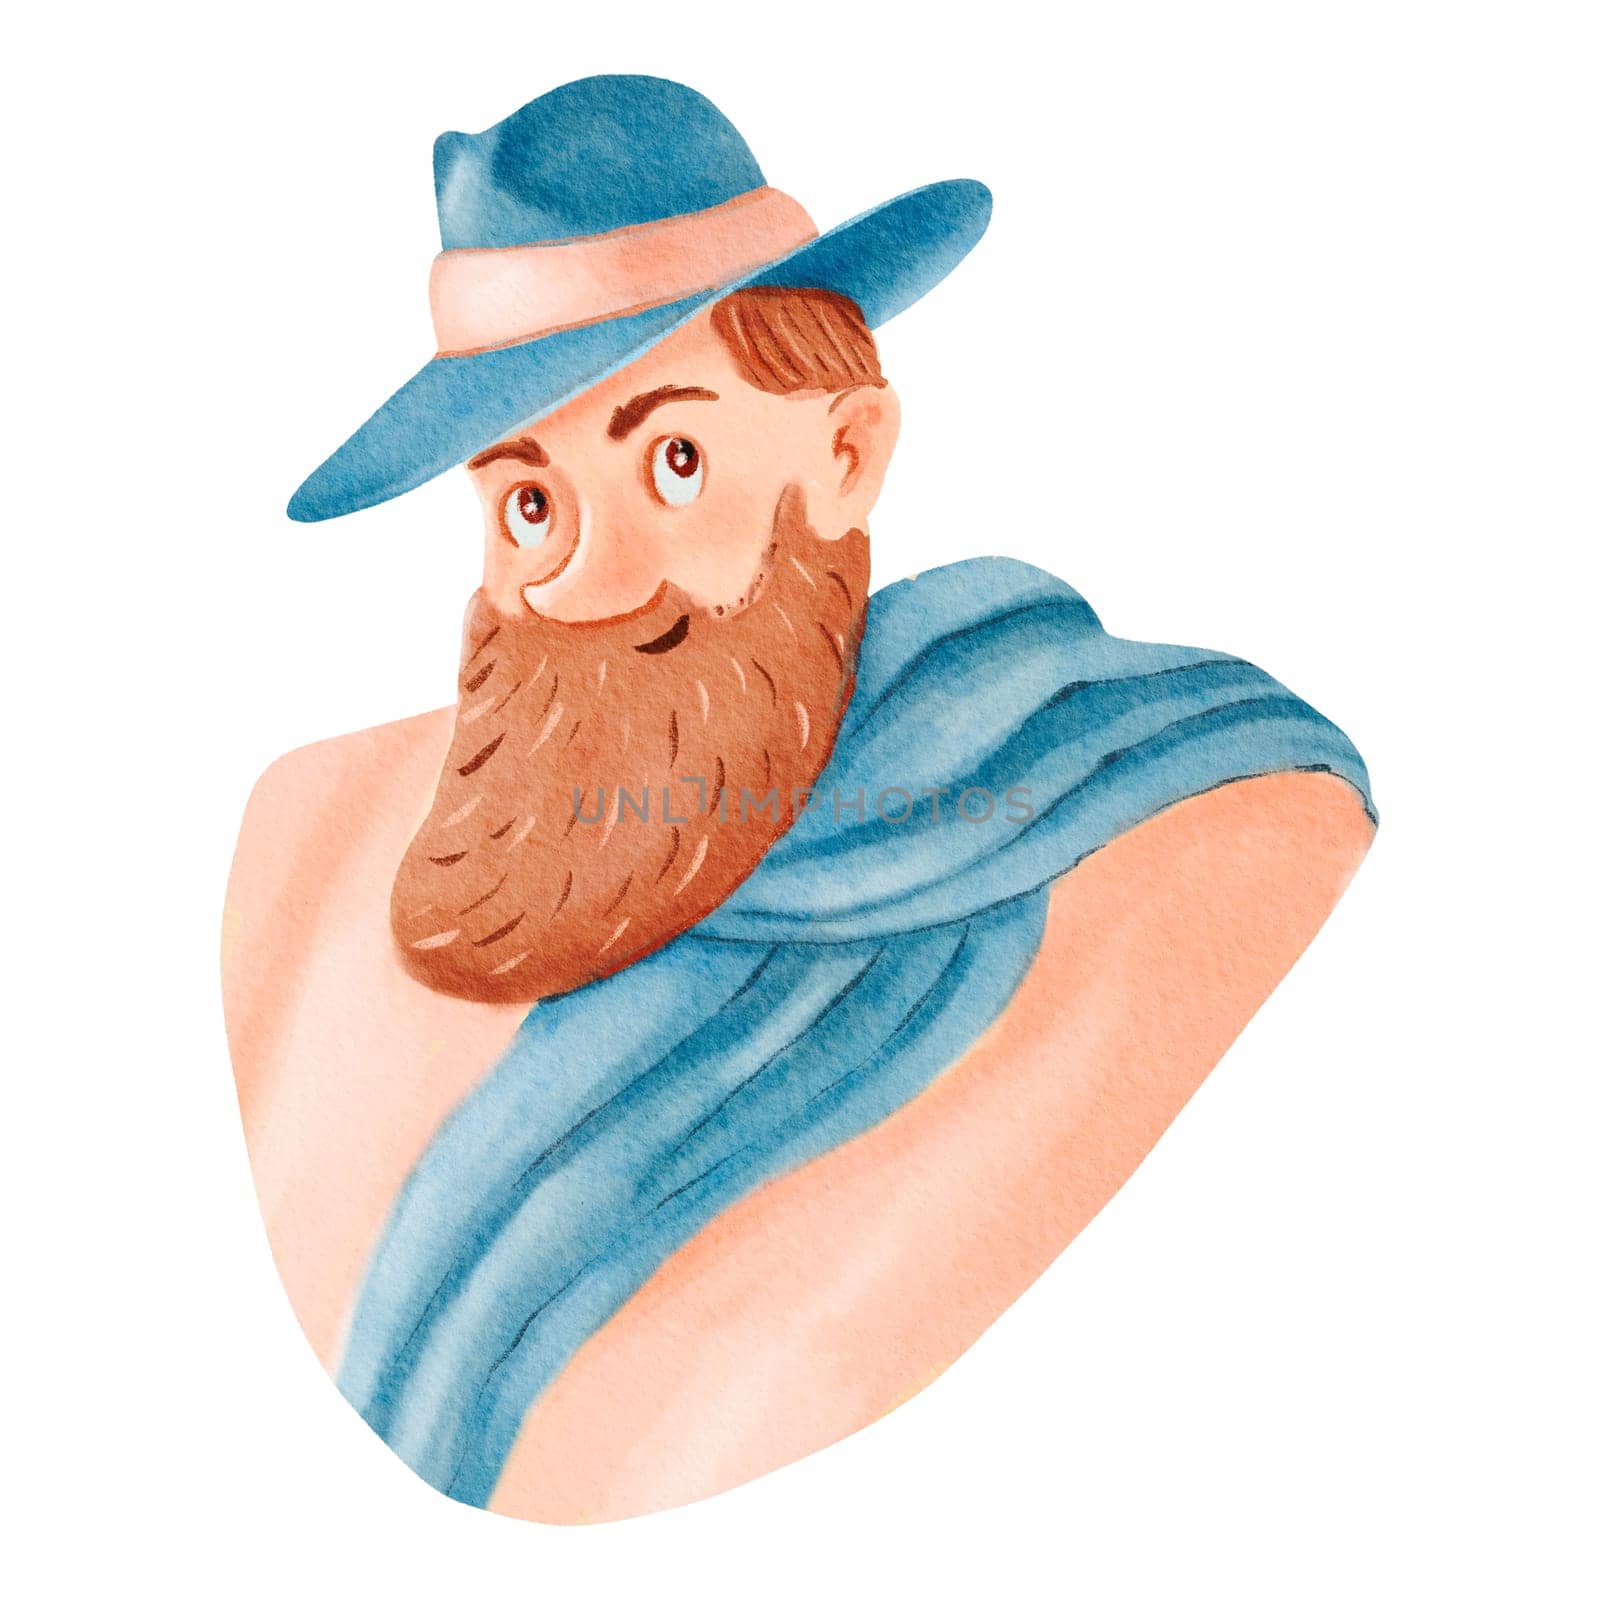 The man with a beard and a hat is stylishly wearing a blue scarf around his neck, adding a touch of sophistication to his costume hat ensemble.